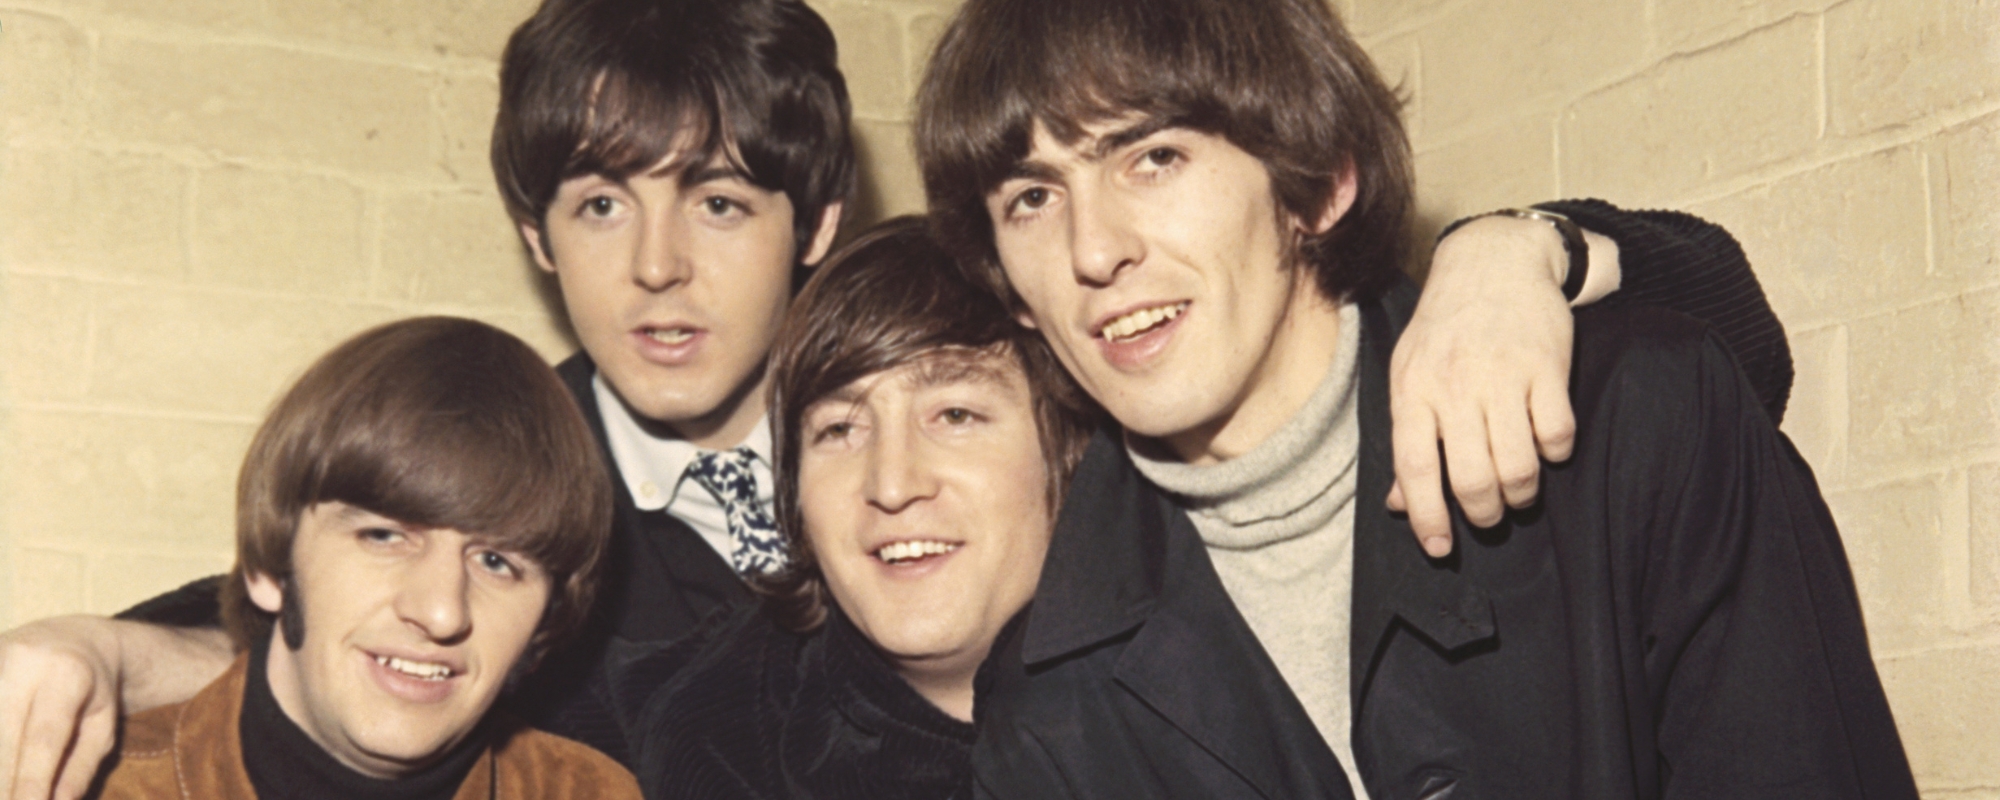 3 Rare Songs That The Beatles Never Played Live